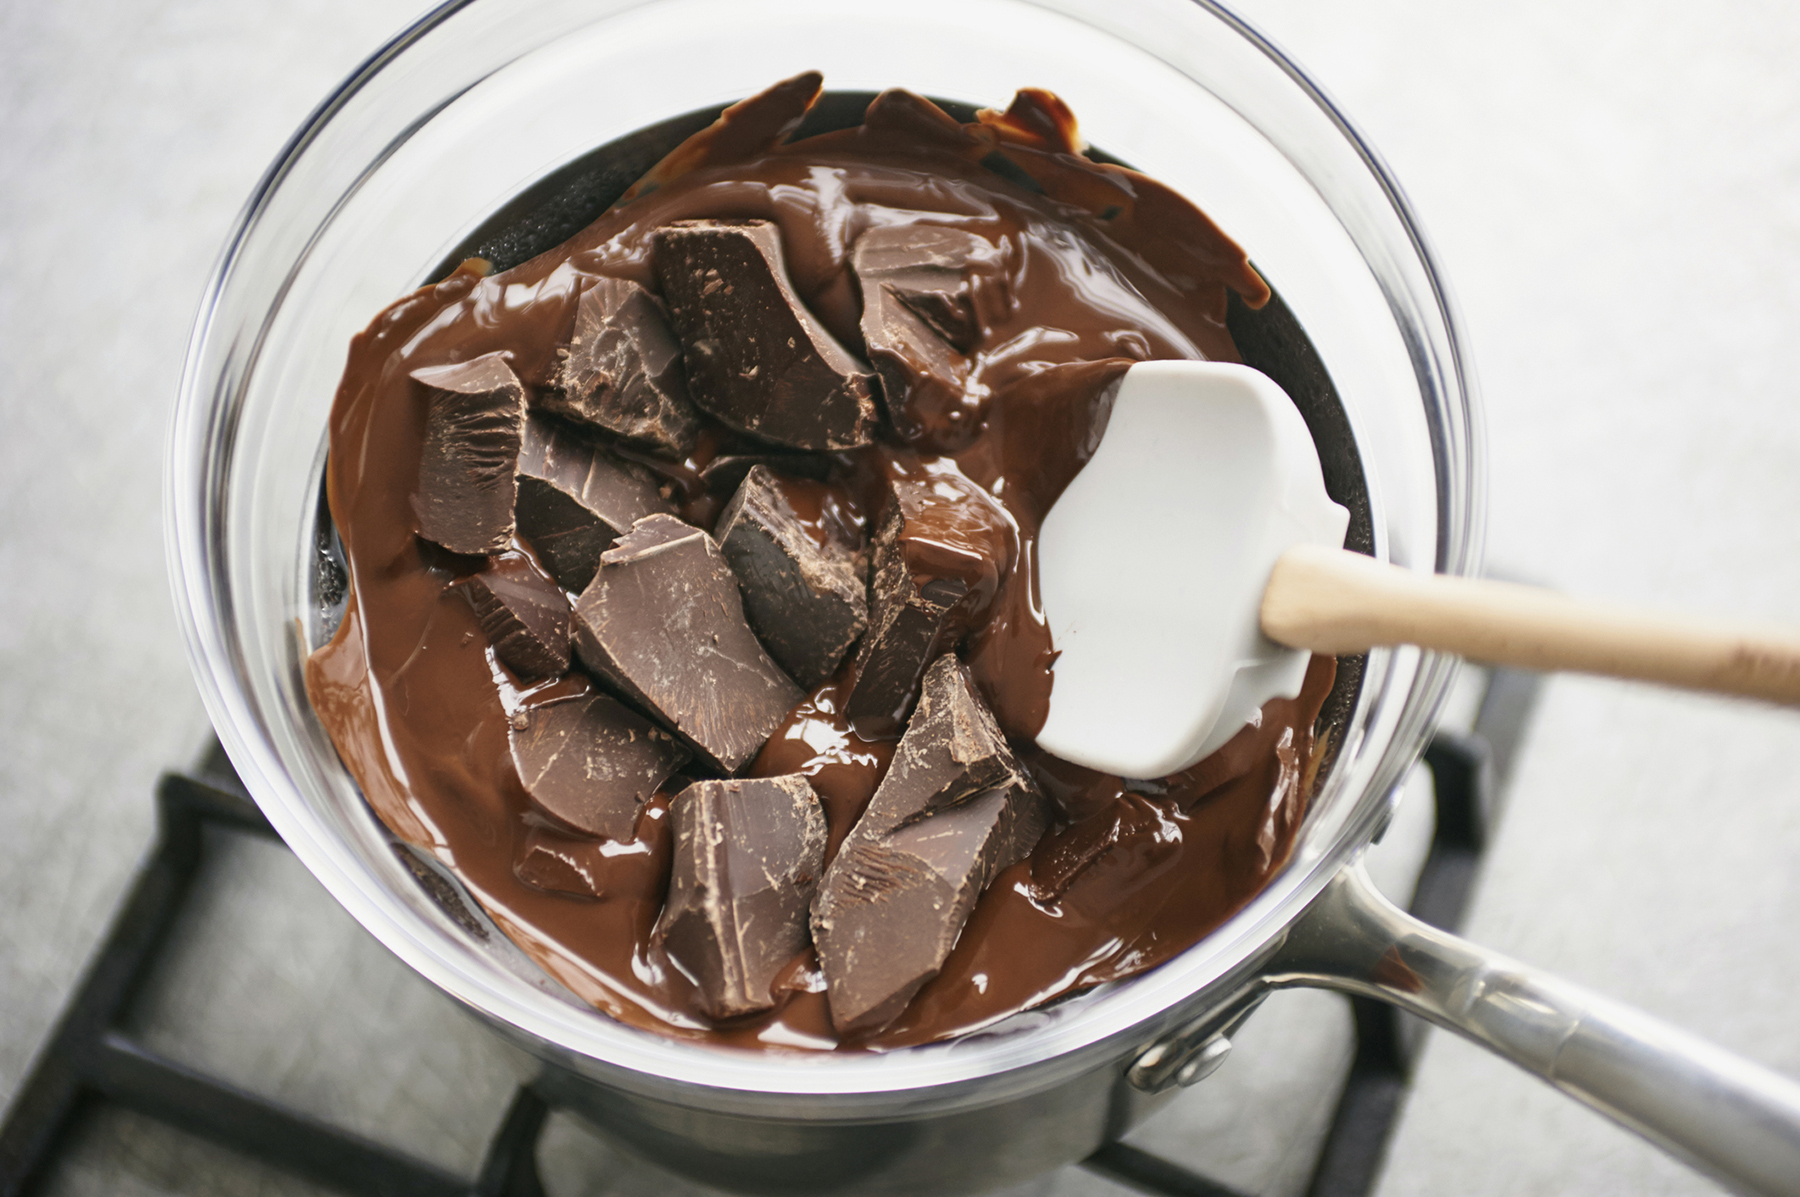 How To Make and Use a Double Boiler or Bain Marie - Veganbaking